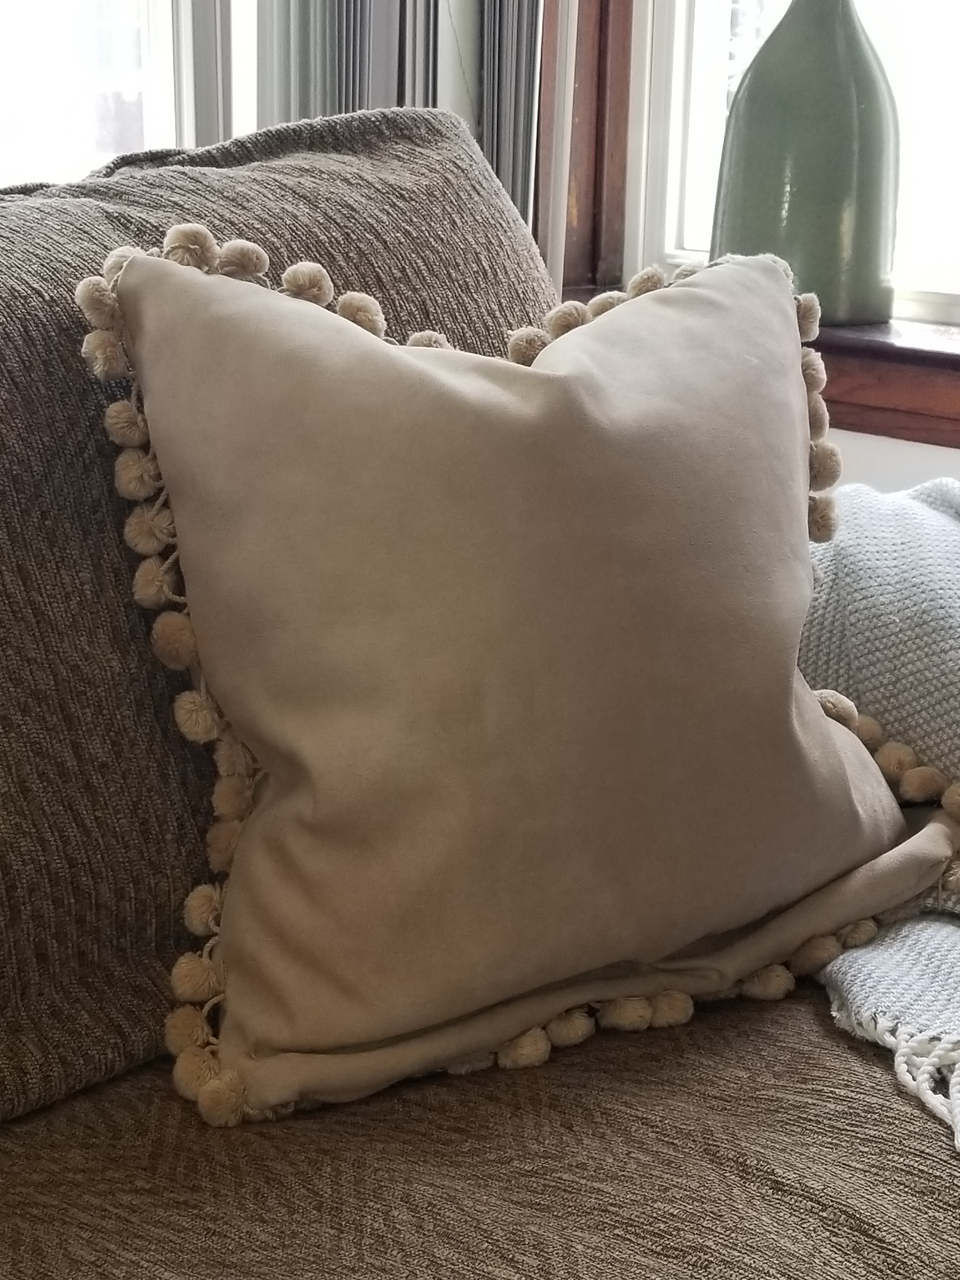 taupe velour fabric pillow covers with matching fur pom pom fringe trim on tan couch with taupe throw cover